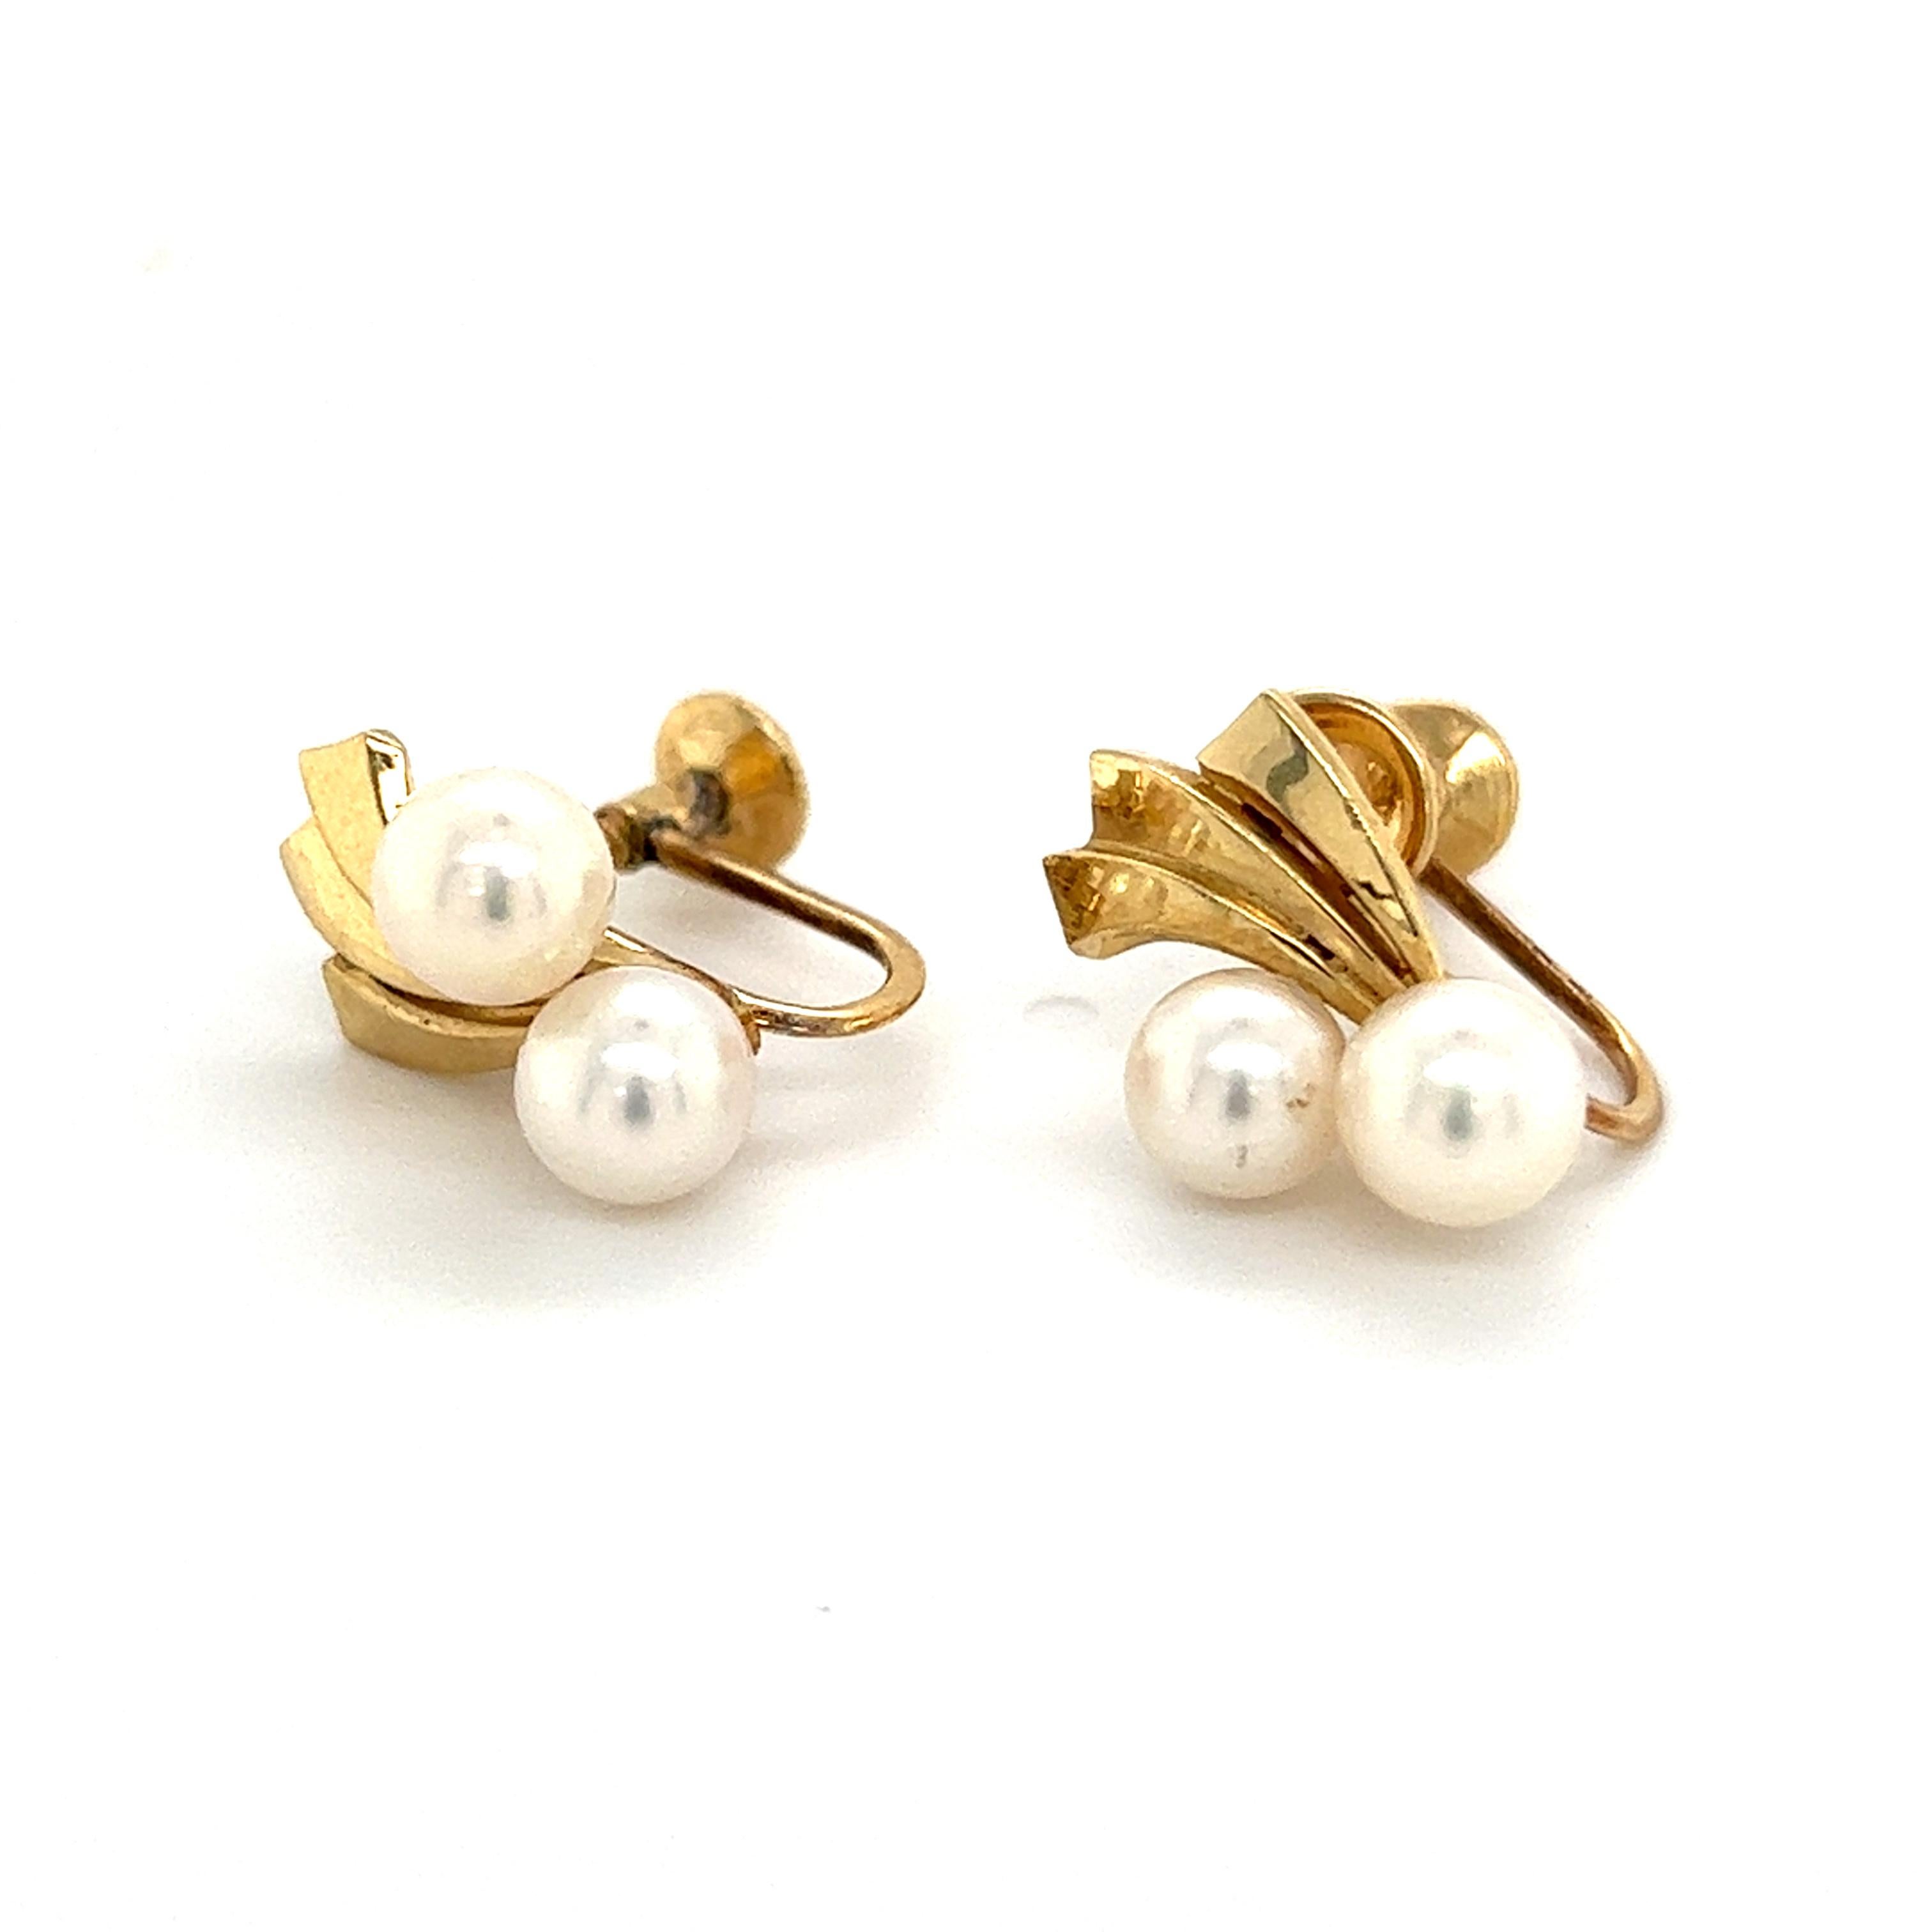 Mikimoto Estate Akoya Pearl Earrings 14k Gold 5.7 mm 4.5 Grams In Good Condition For Sale In Brooklyn, NY